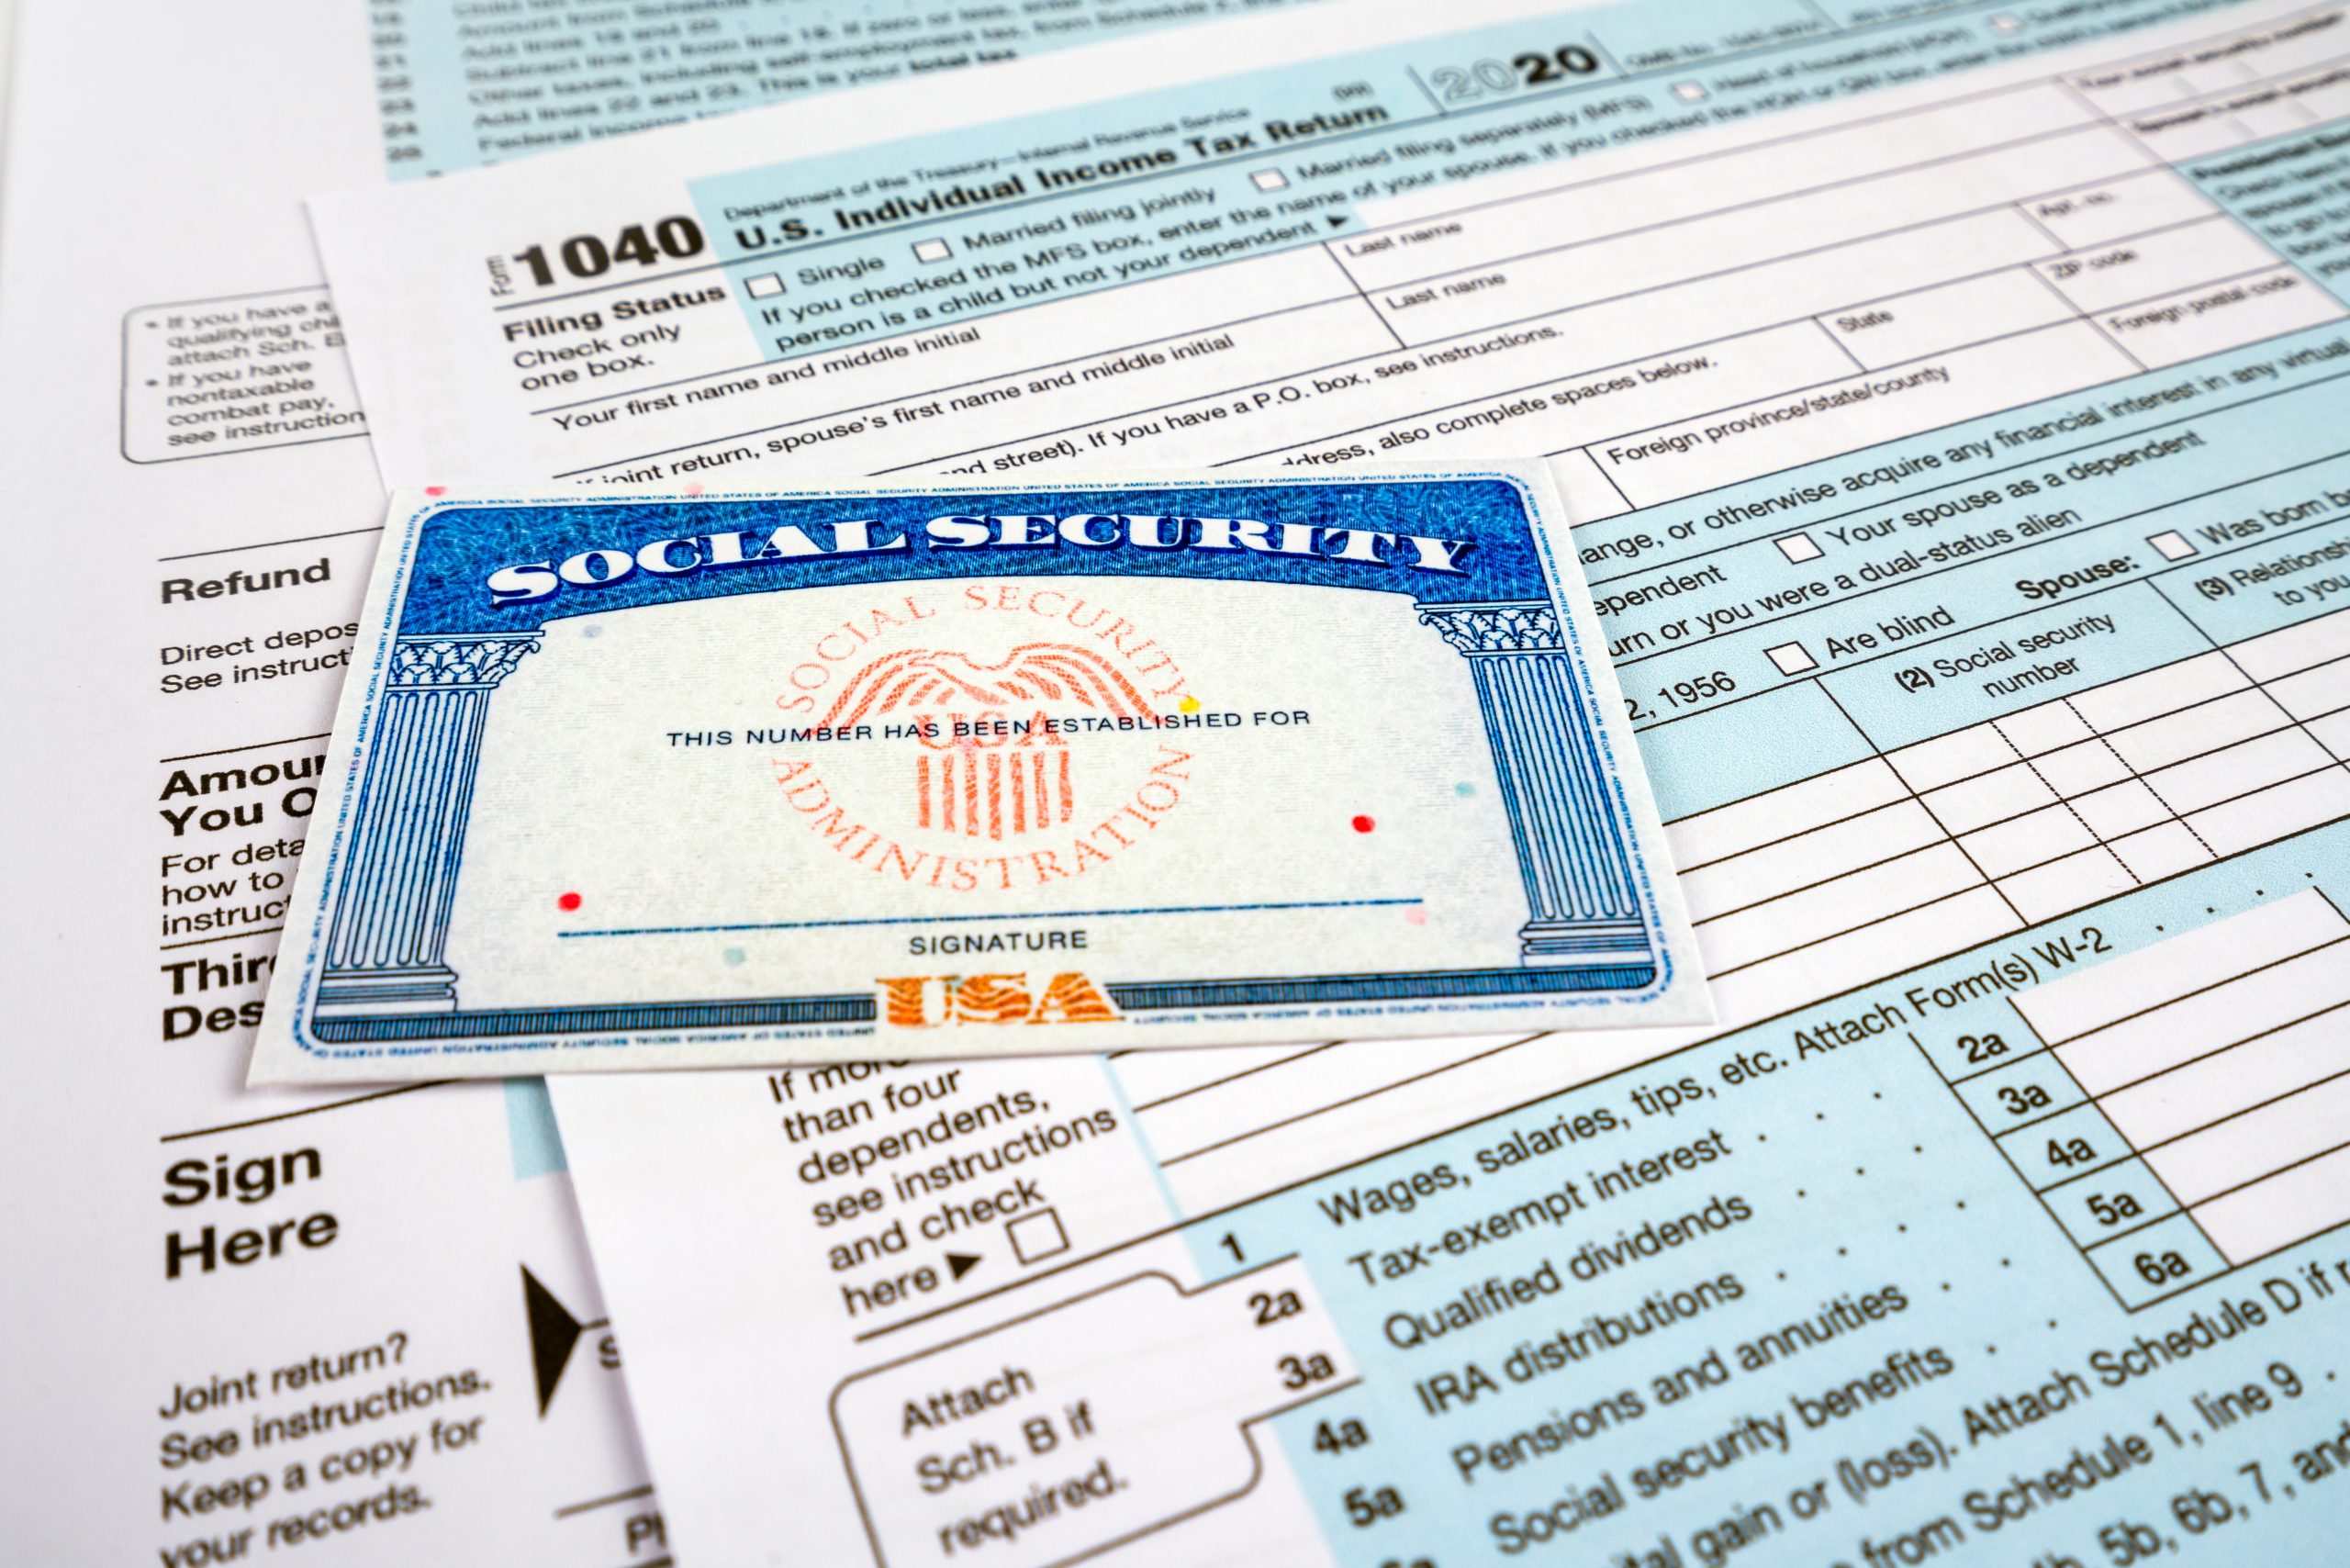 A social security card lay on top of some tax documents